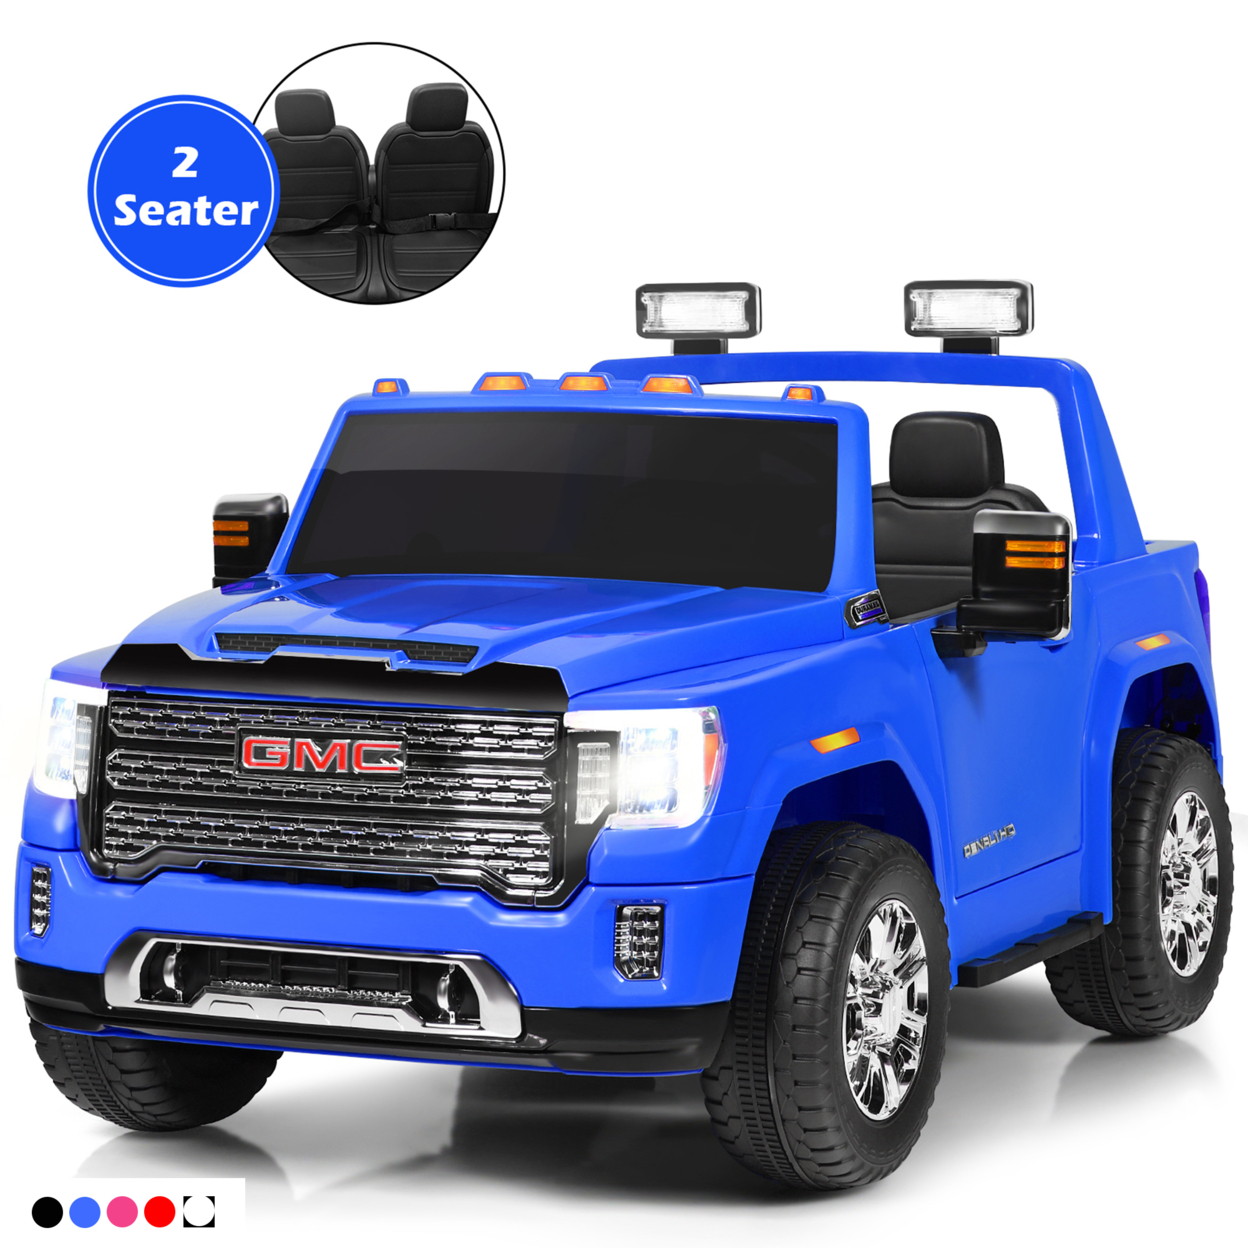 12V Licensed GMC Kids Ride On Car 2-Seater Truck W/ Remote Control - Blue